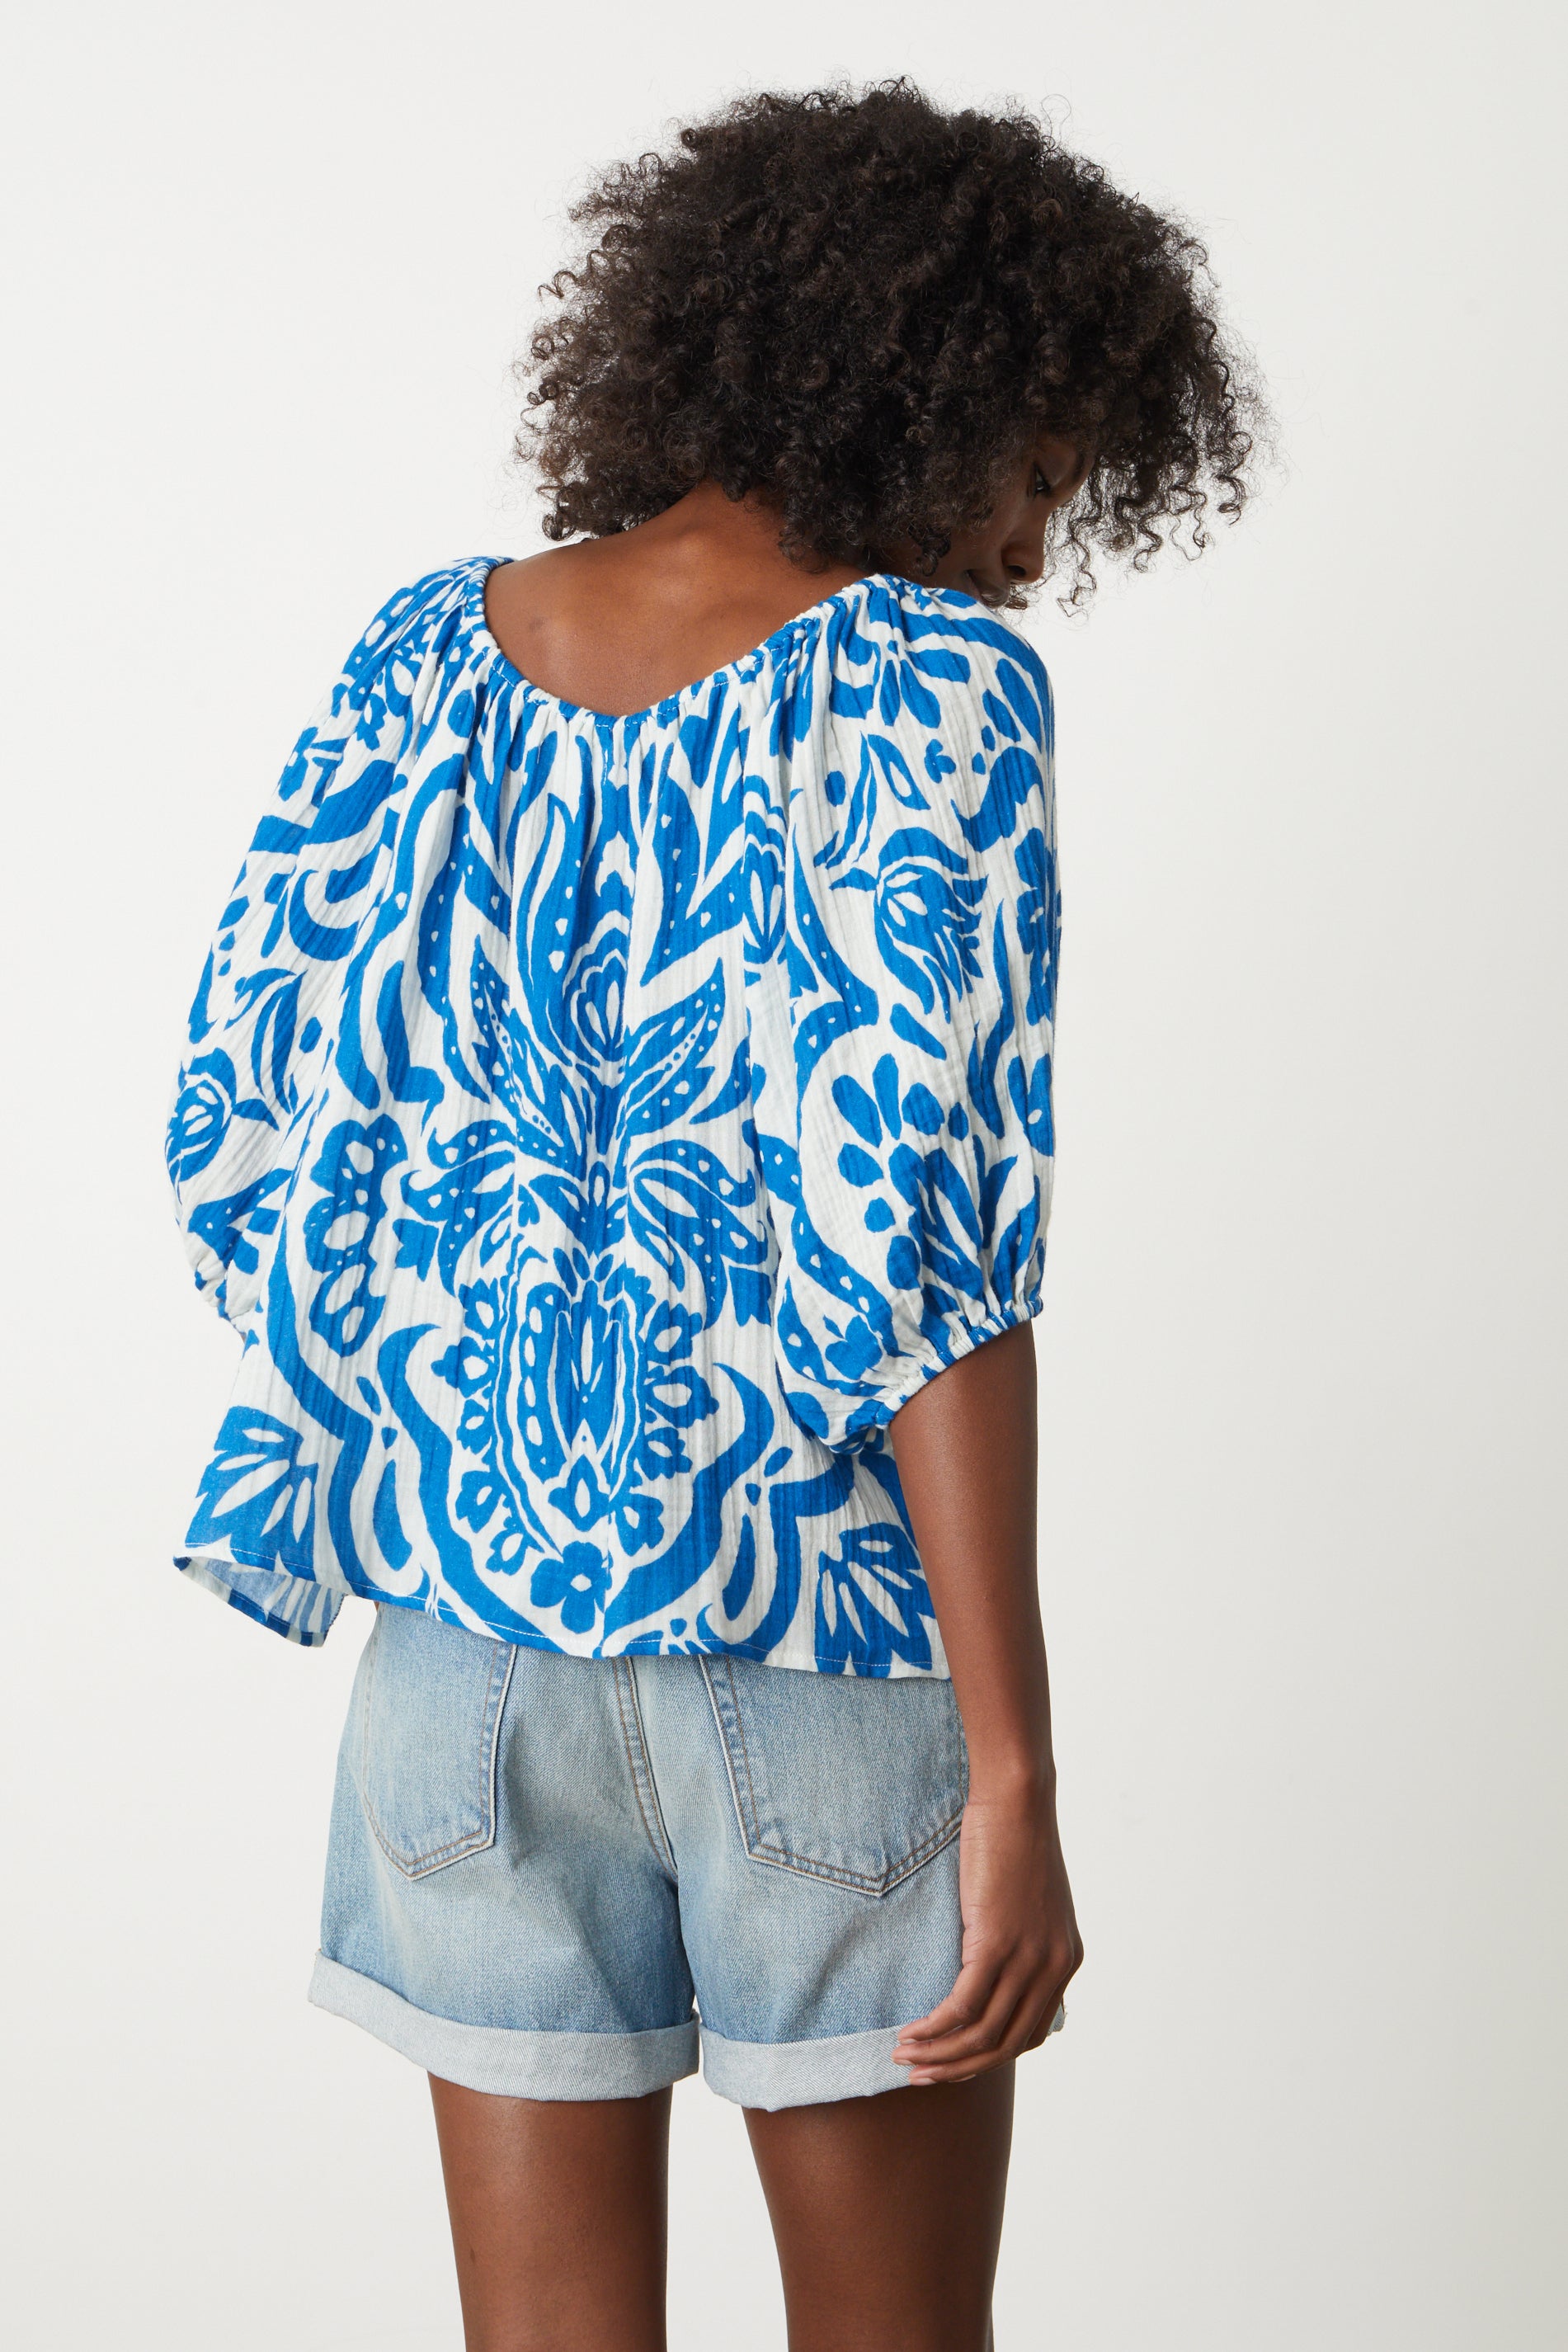   the back view of a woman wearing the Velvet by Graham & Spencer CANDICE PRINTED COTTON GAUZE TOP. 